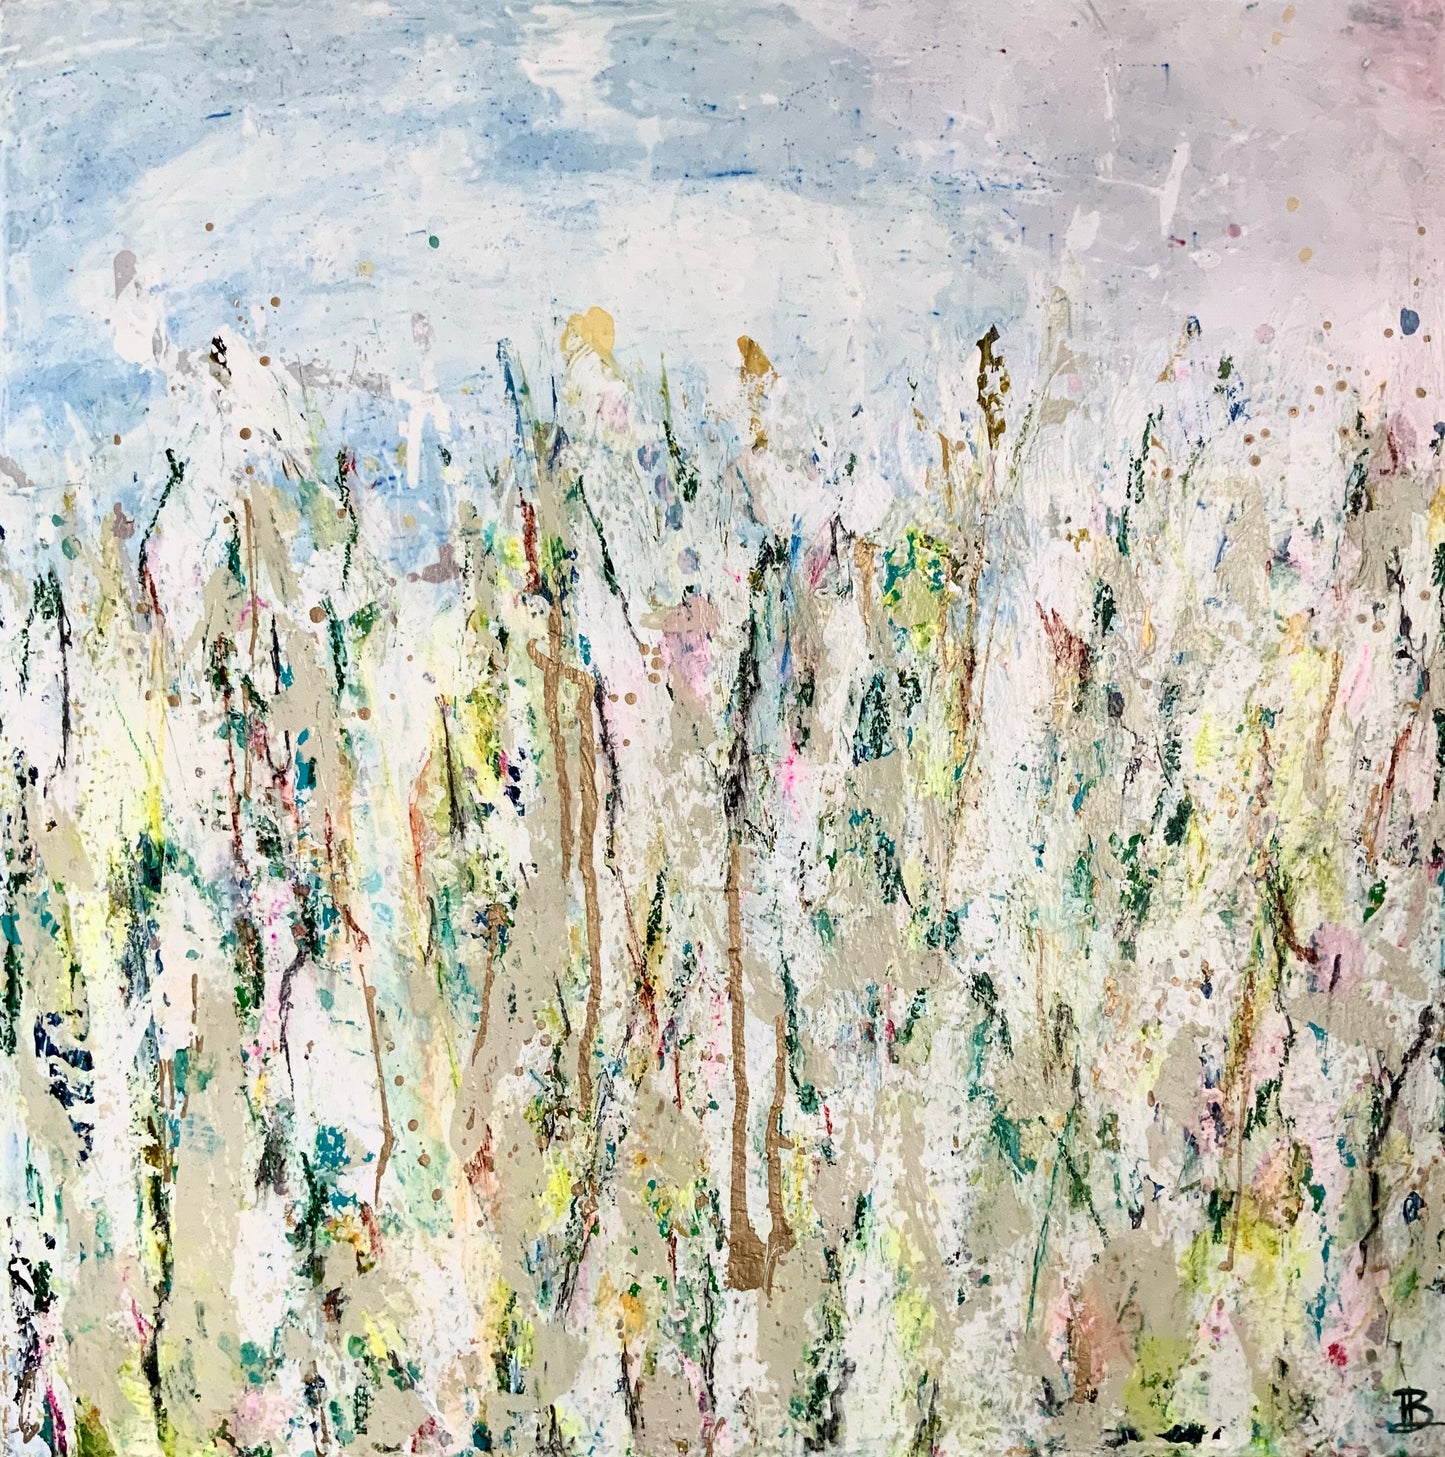 Meadow at the Marina - 20 x 20 - SALE